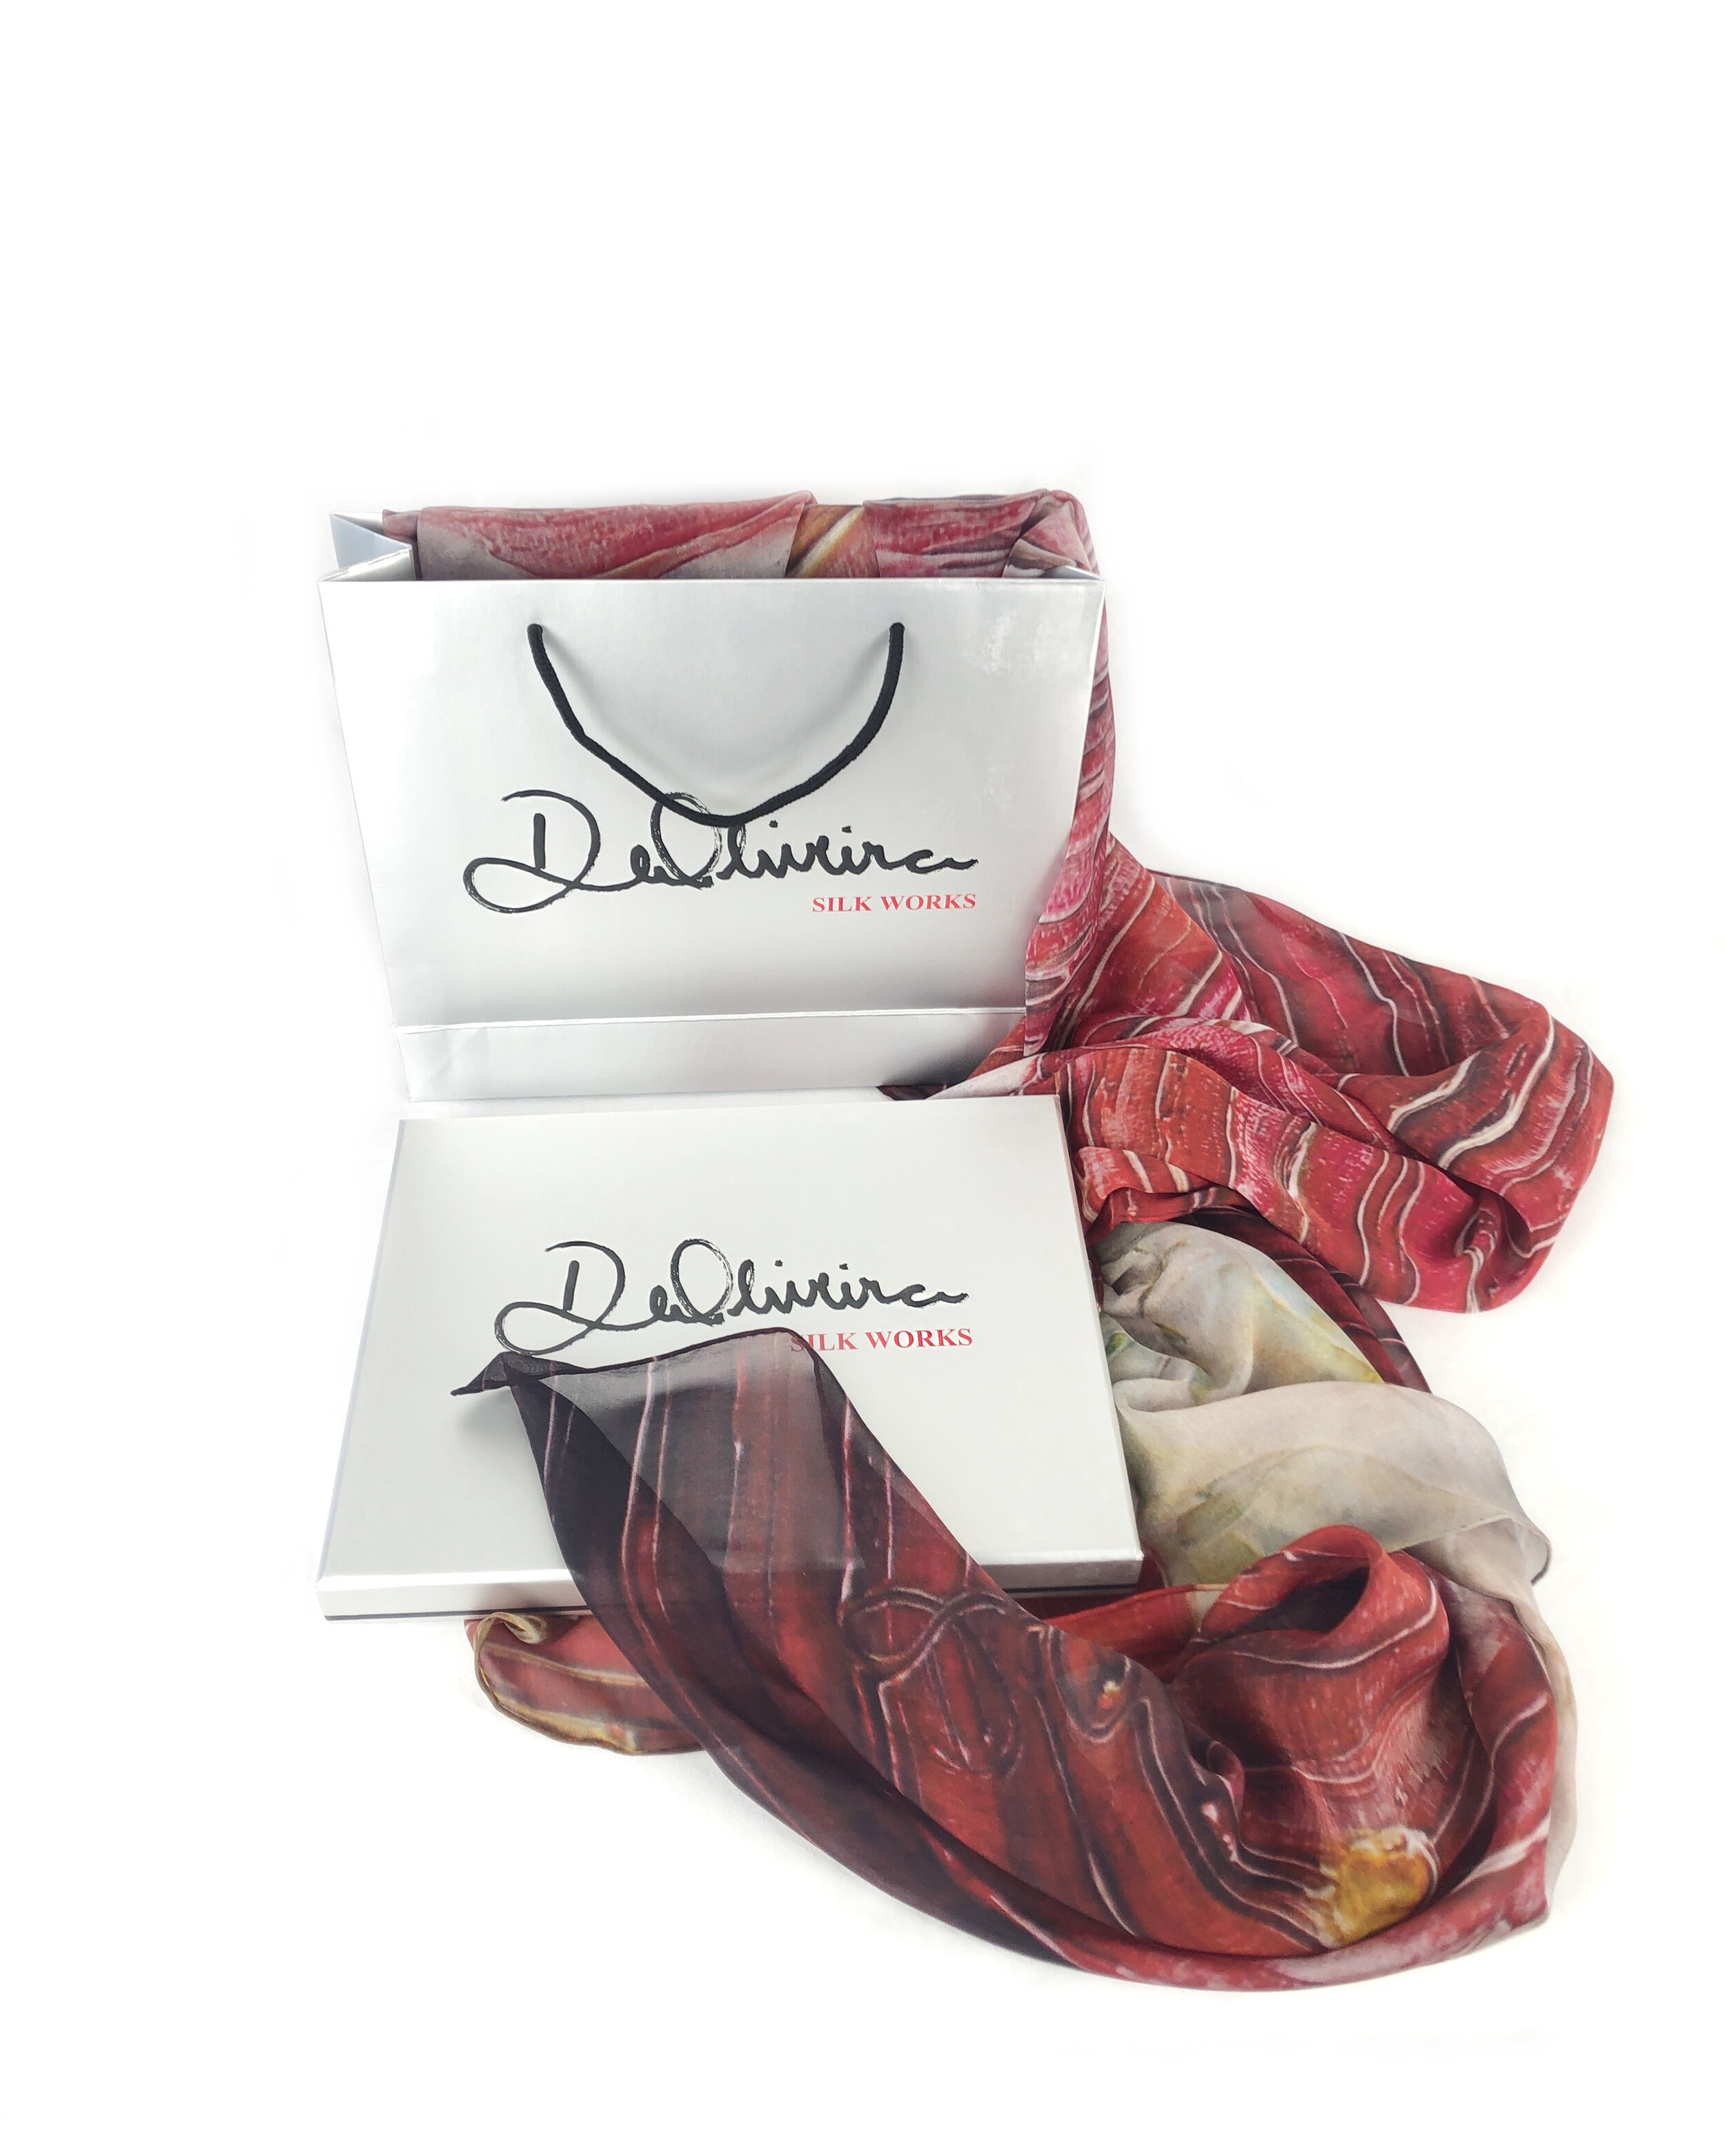  Included with each scarf is an Artist signature box and bag suitable to its collection.   For more information please contact us here.  